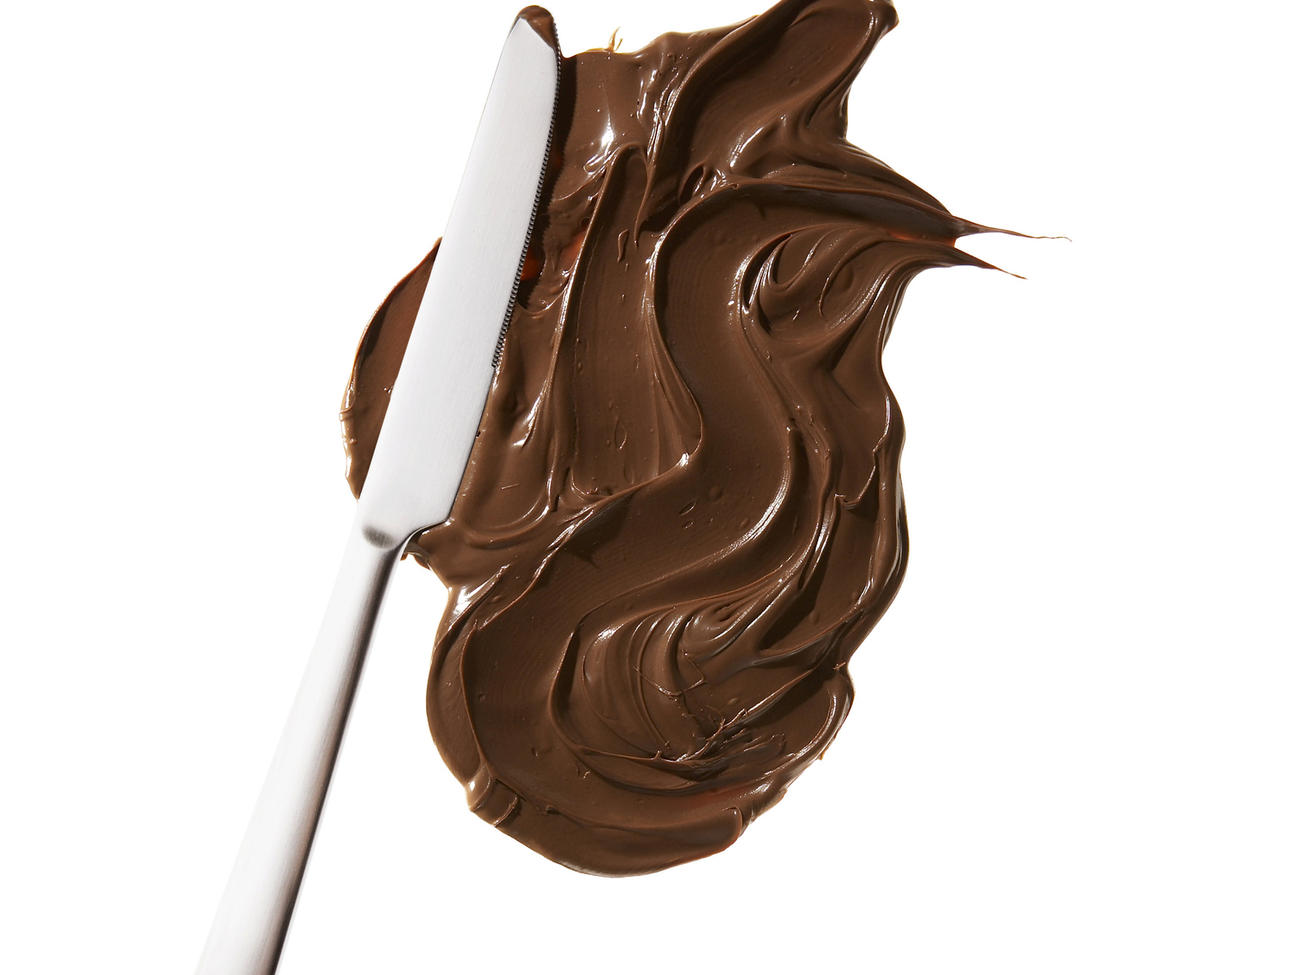 Chocolate Butter Is Here, Hang on to Your Arteries